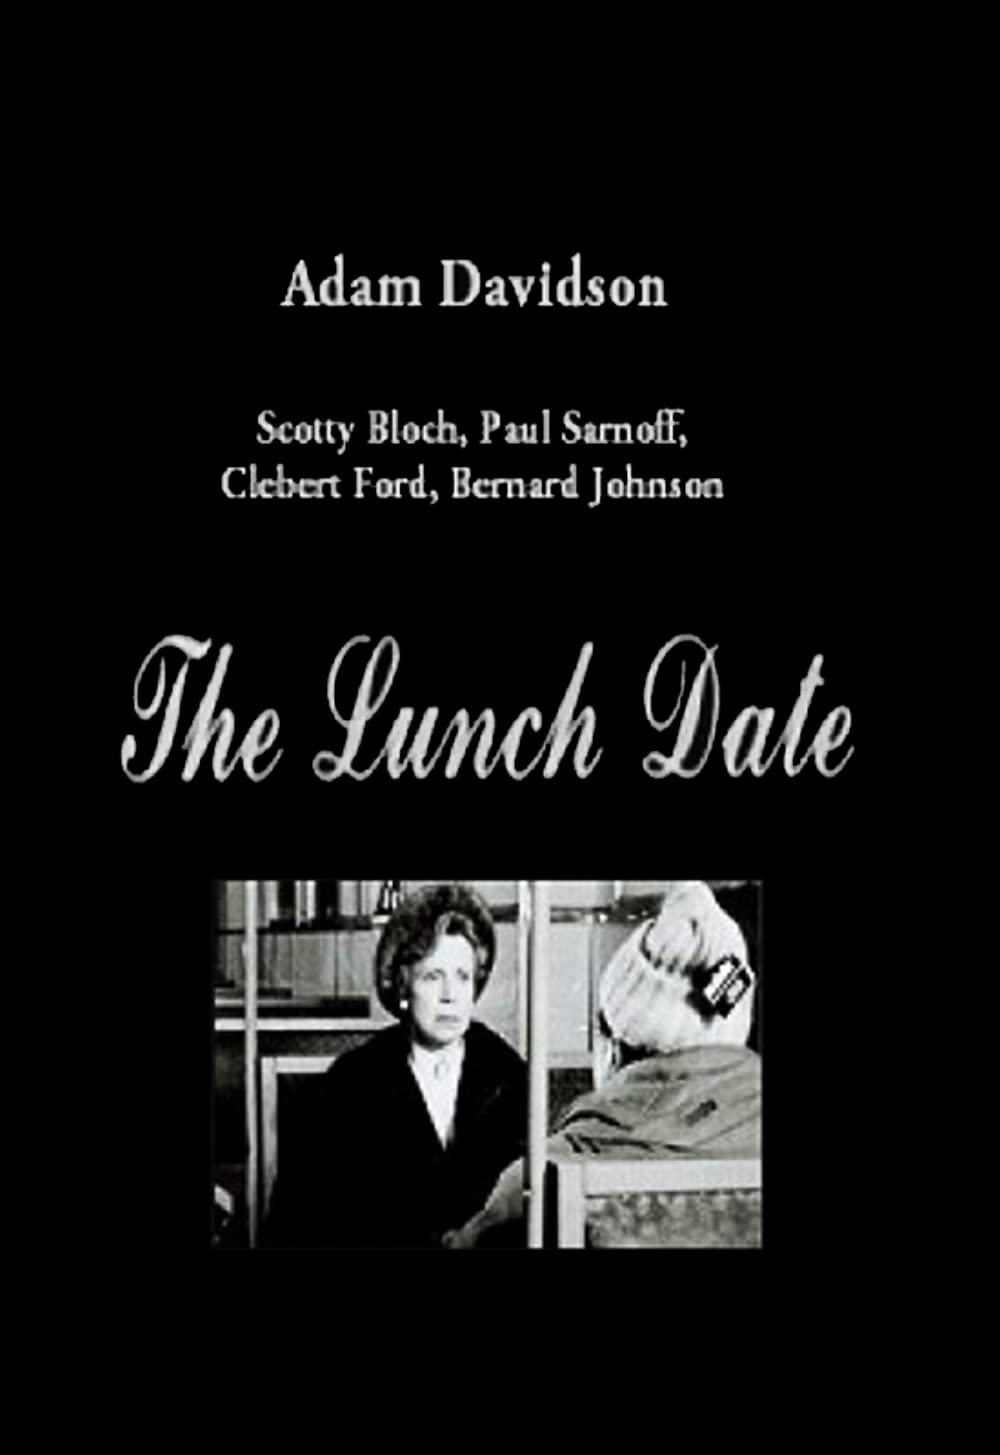 The Lunch Date (Short 1989)